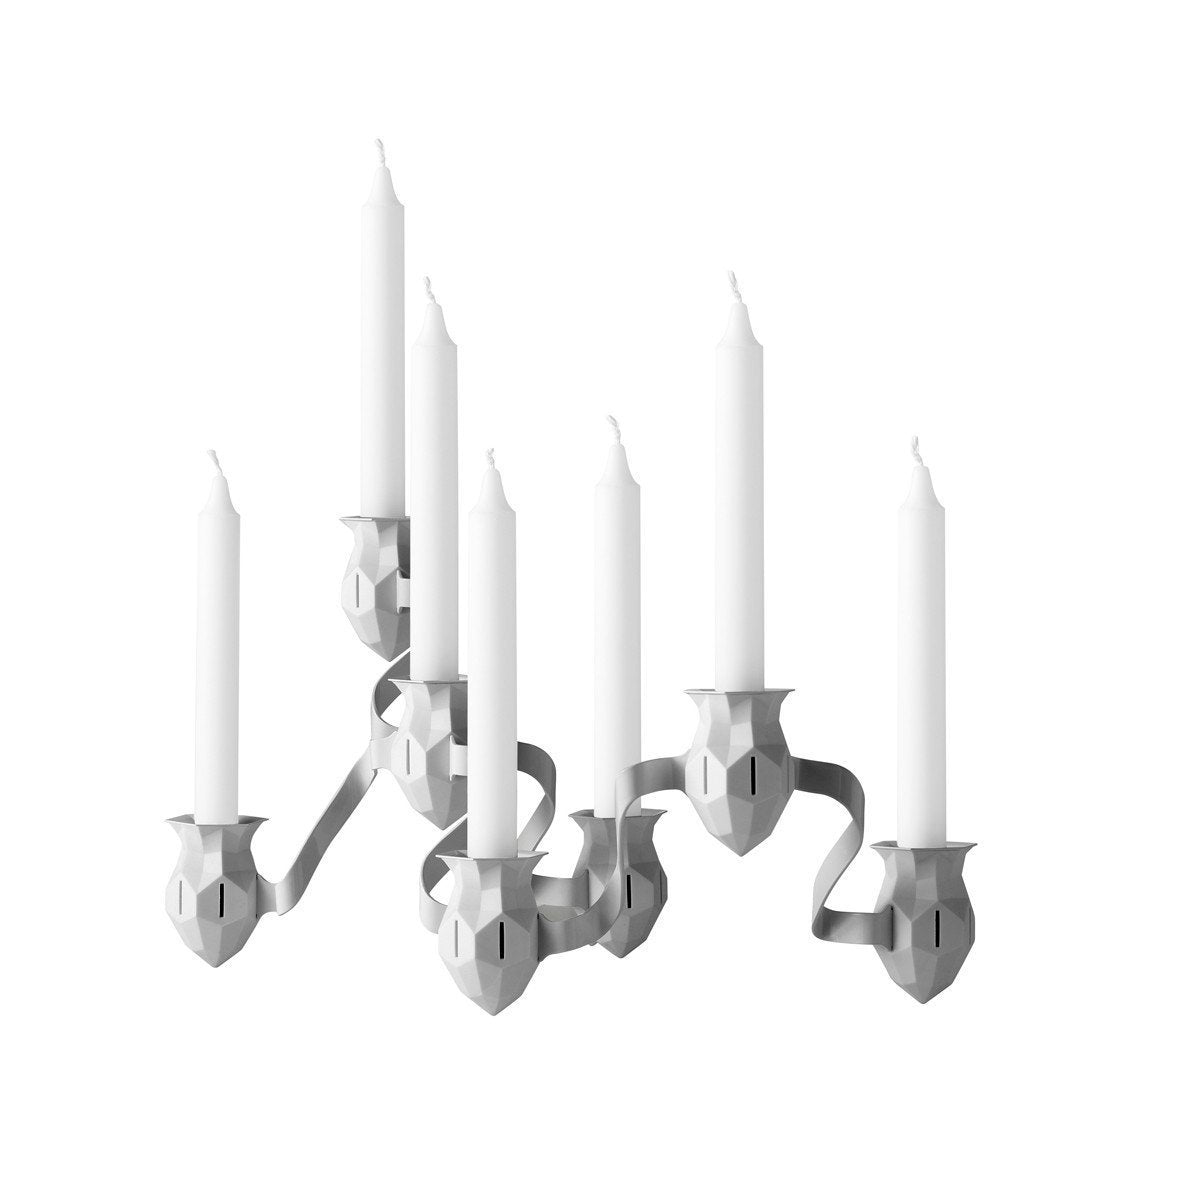 The More the Merrier Candlestick